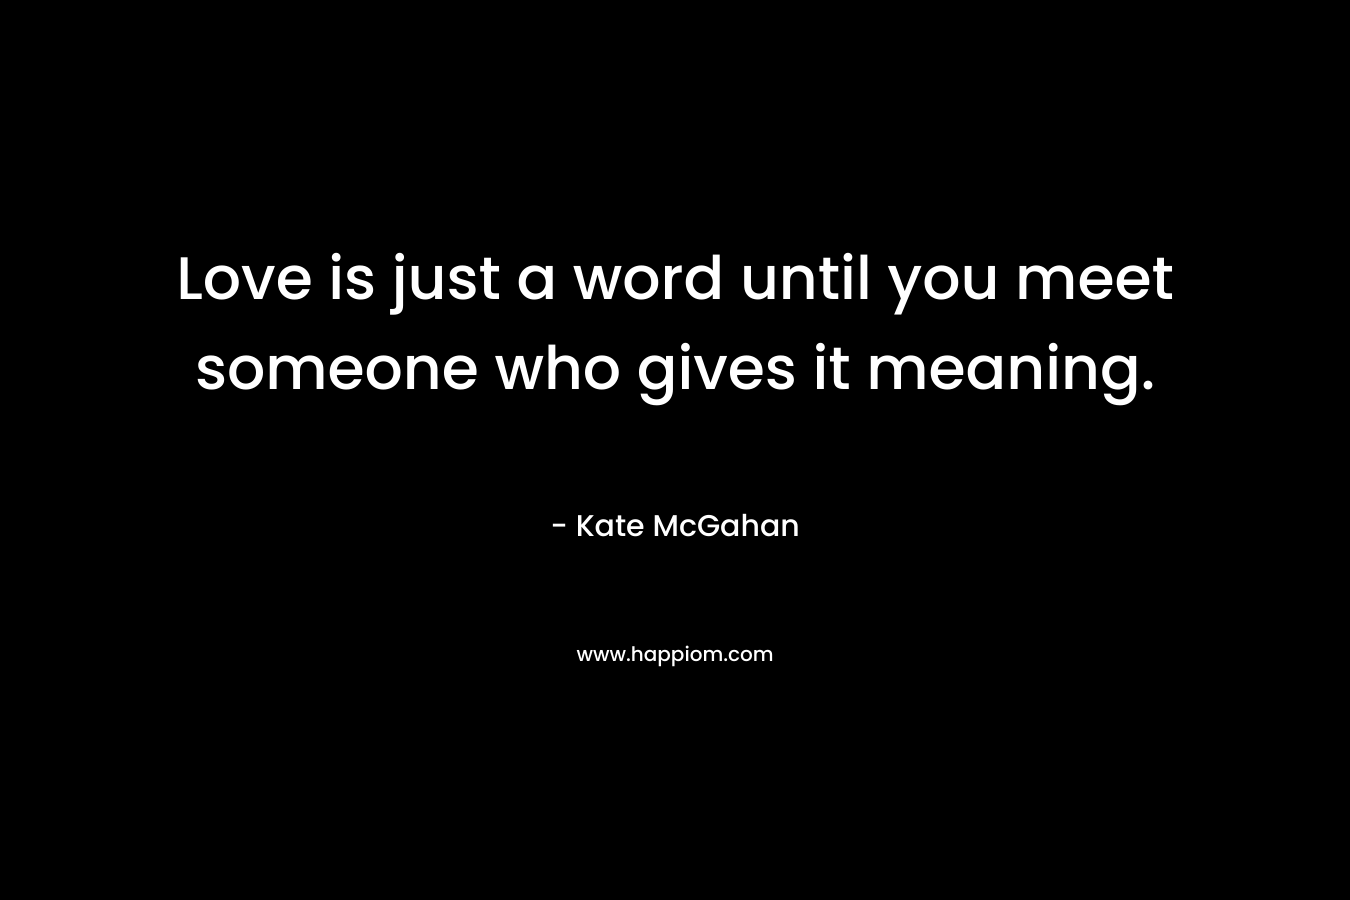 Love is just a word until you meet someone who gives it meaning.